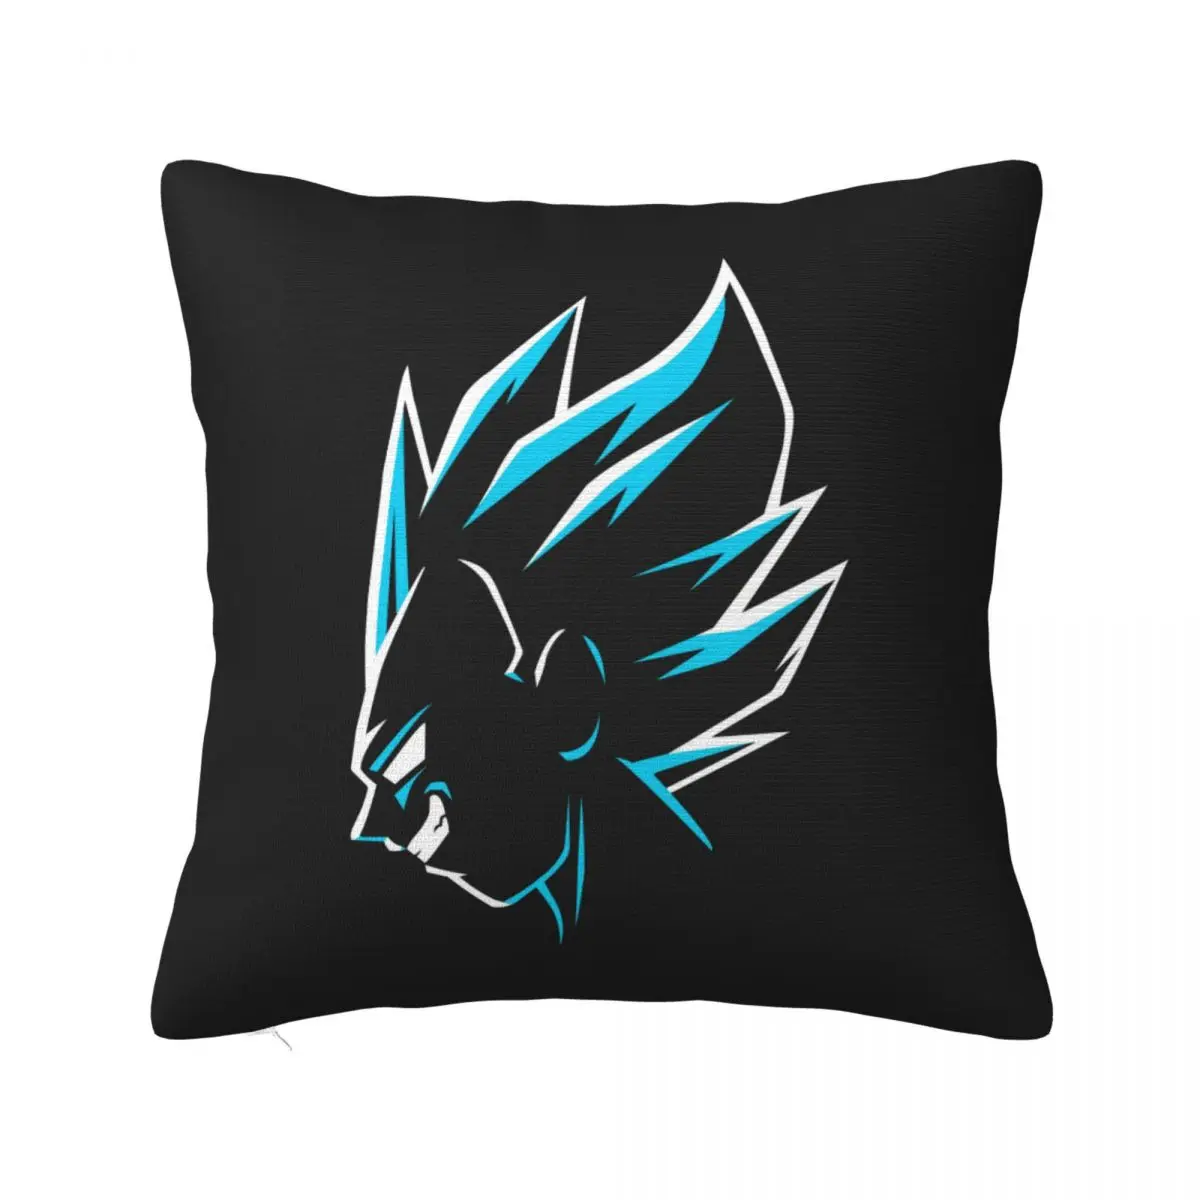 Son Goku Anime Pillowcase Printed Polyester Cushion Cover Decorations Throw Pillow Case Cover Home Square 18